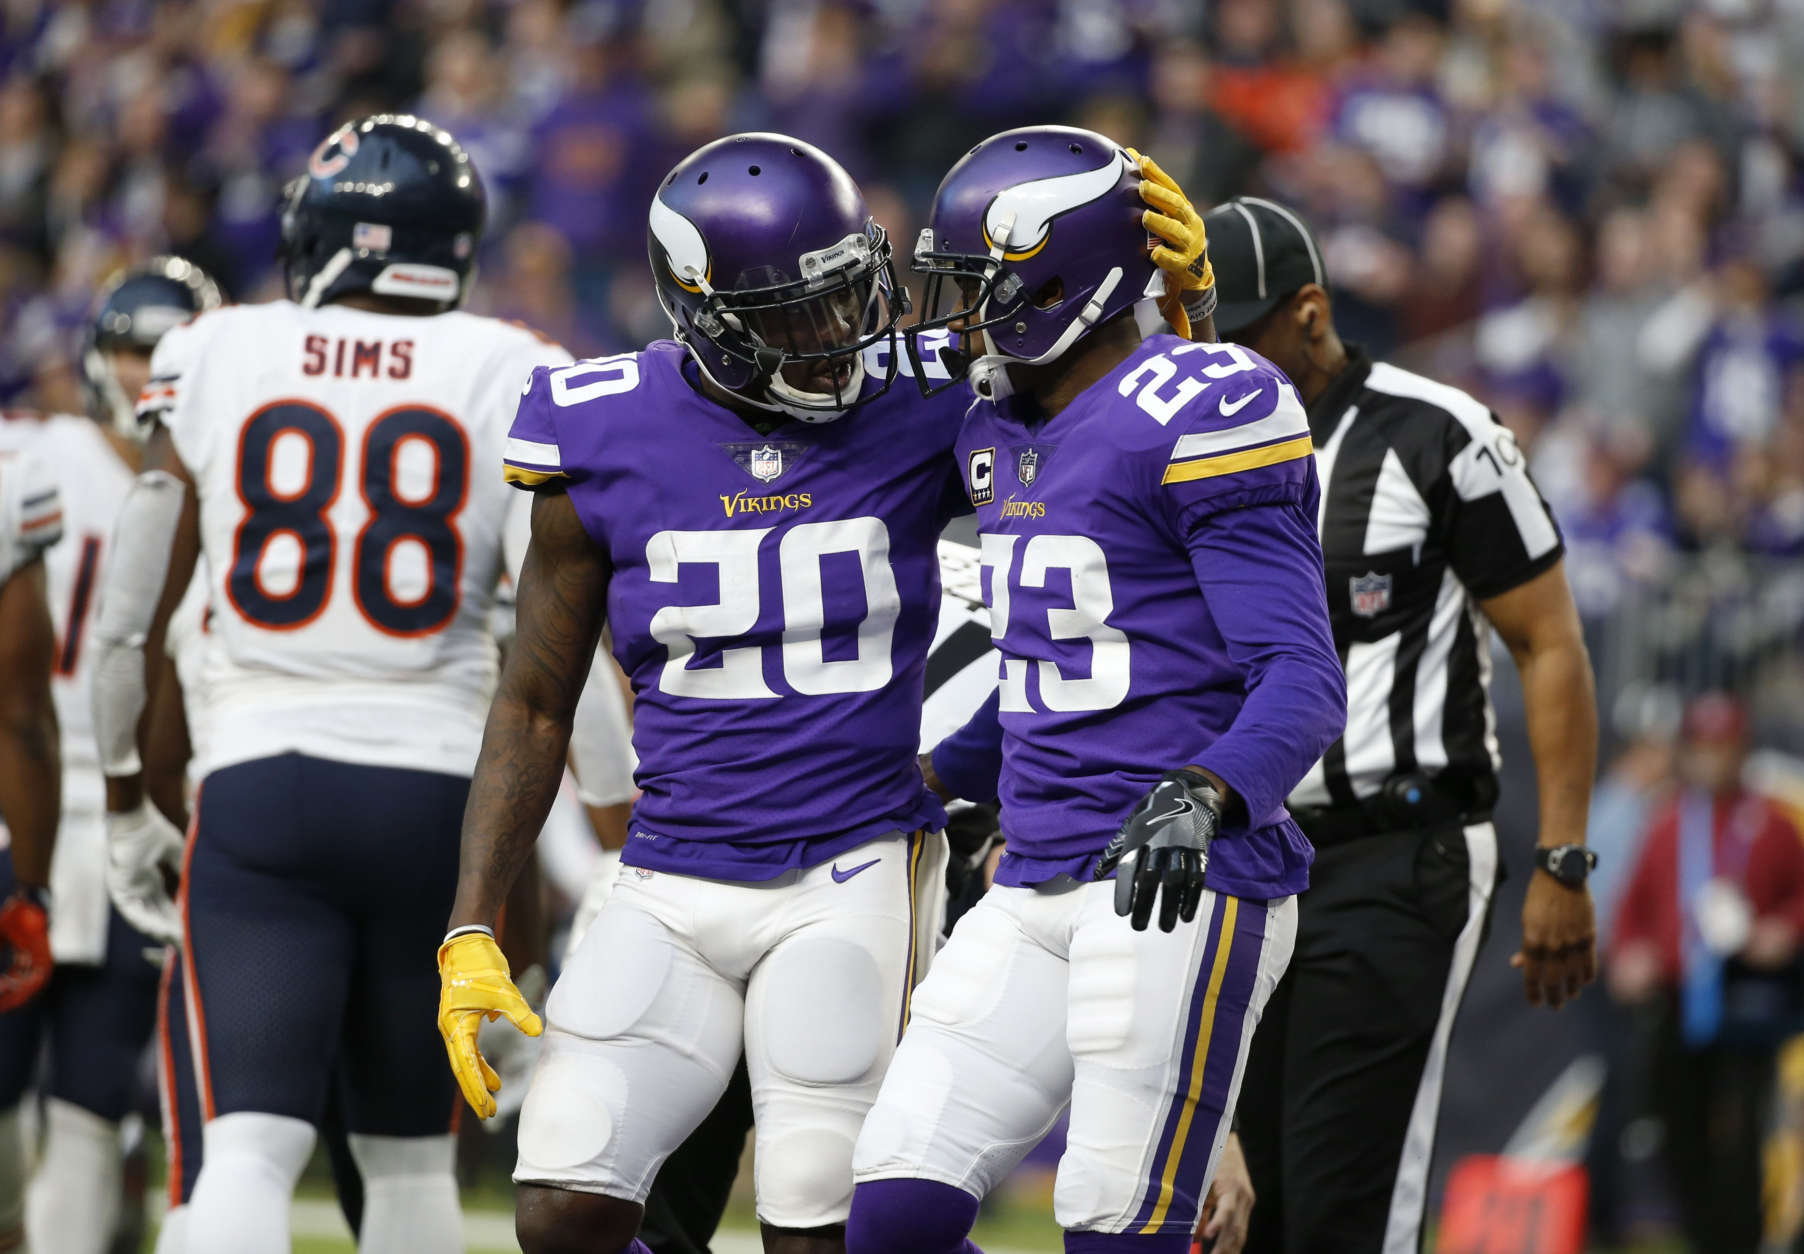 Minnesota Vikings cornerback Mackensie Alexander (20) celebrates with teammate Terence Newman (23) during the second half of an NFL football game against the Chicago Bears, Sunday, Dec. 31, 2017, in Minneapolis. (AP Photo/Bruce Kluckhohn)